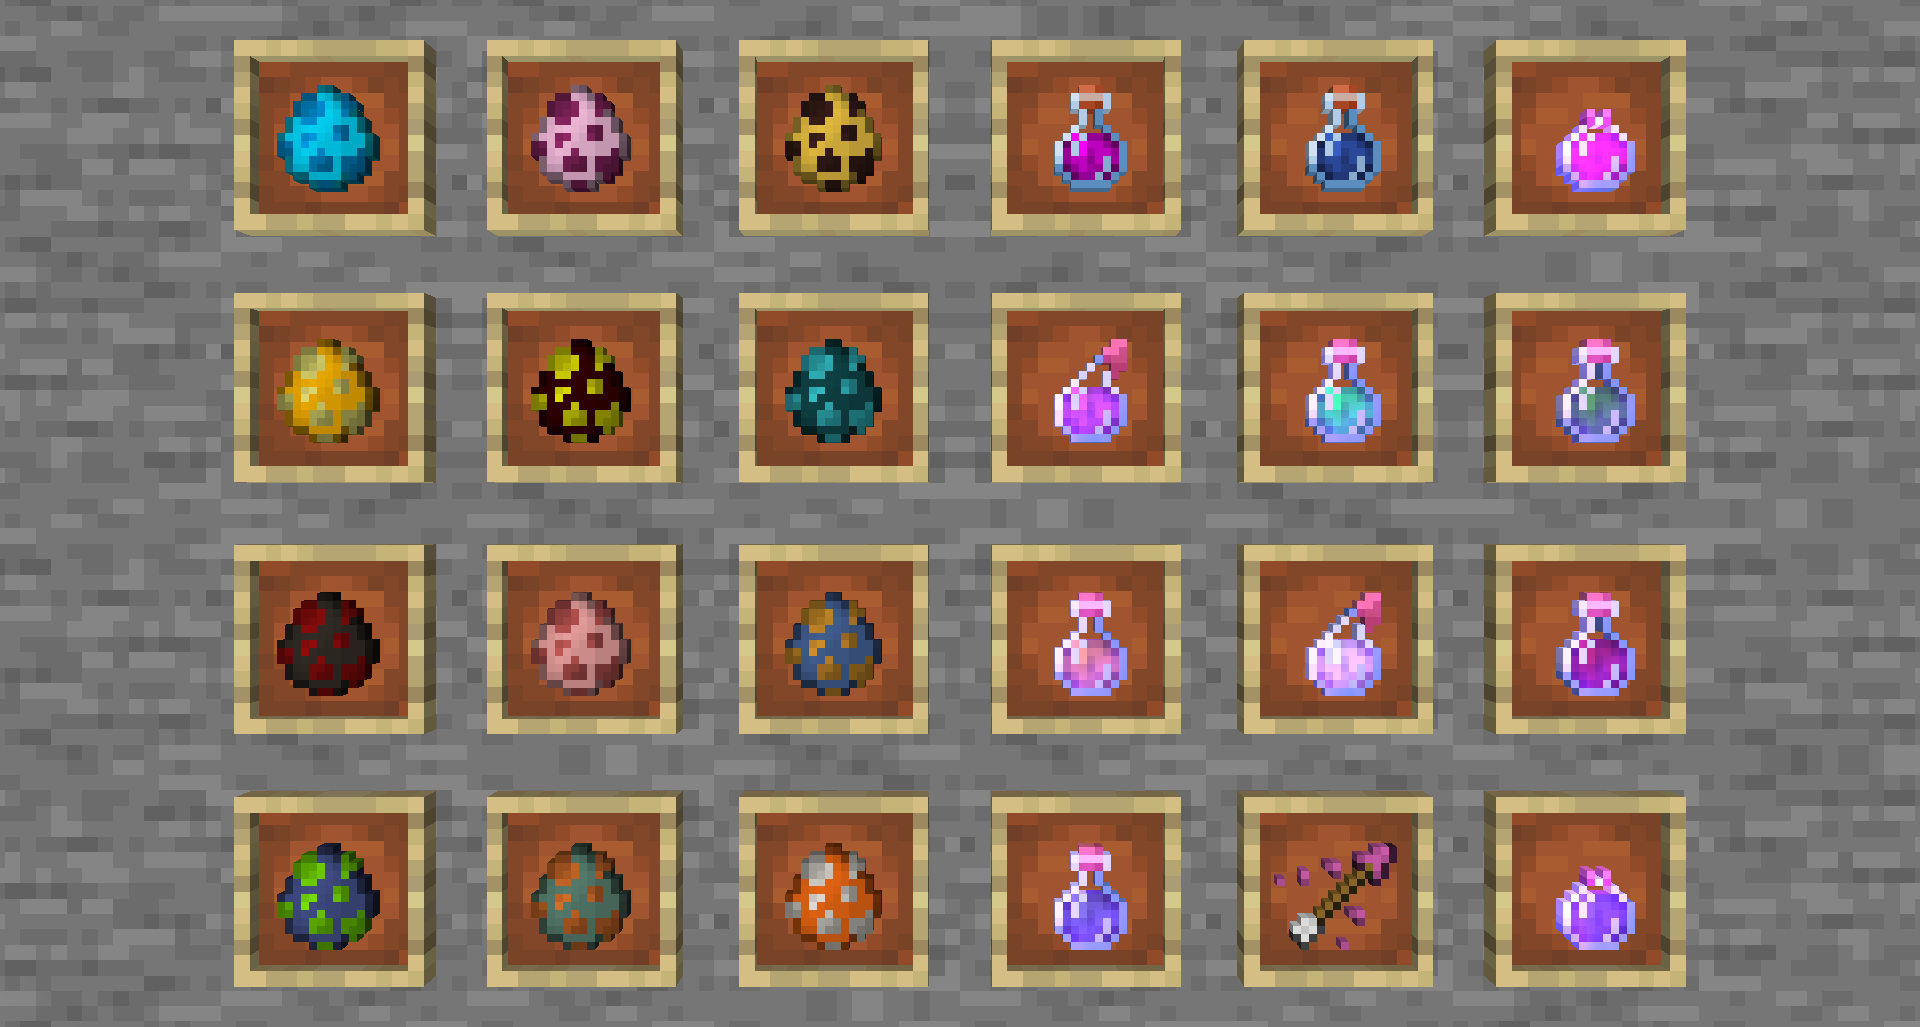 Eggs and potions